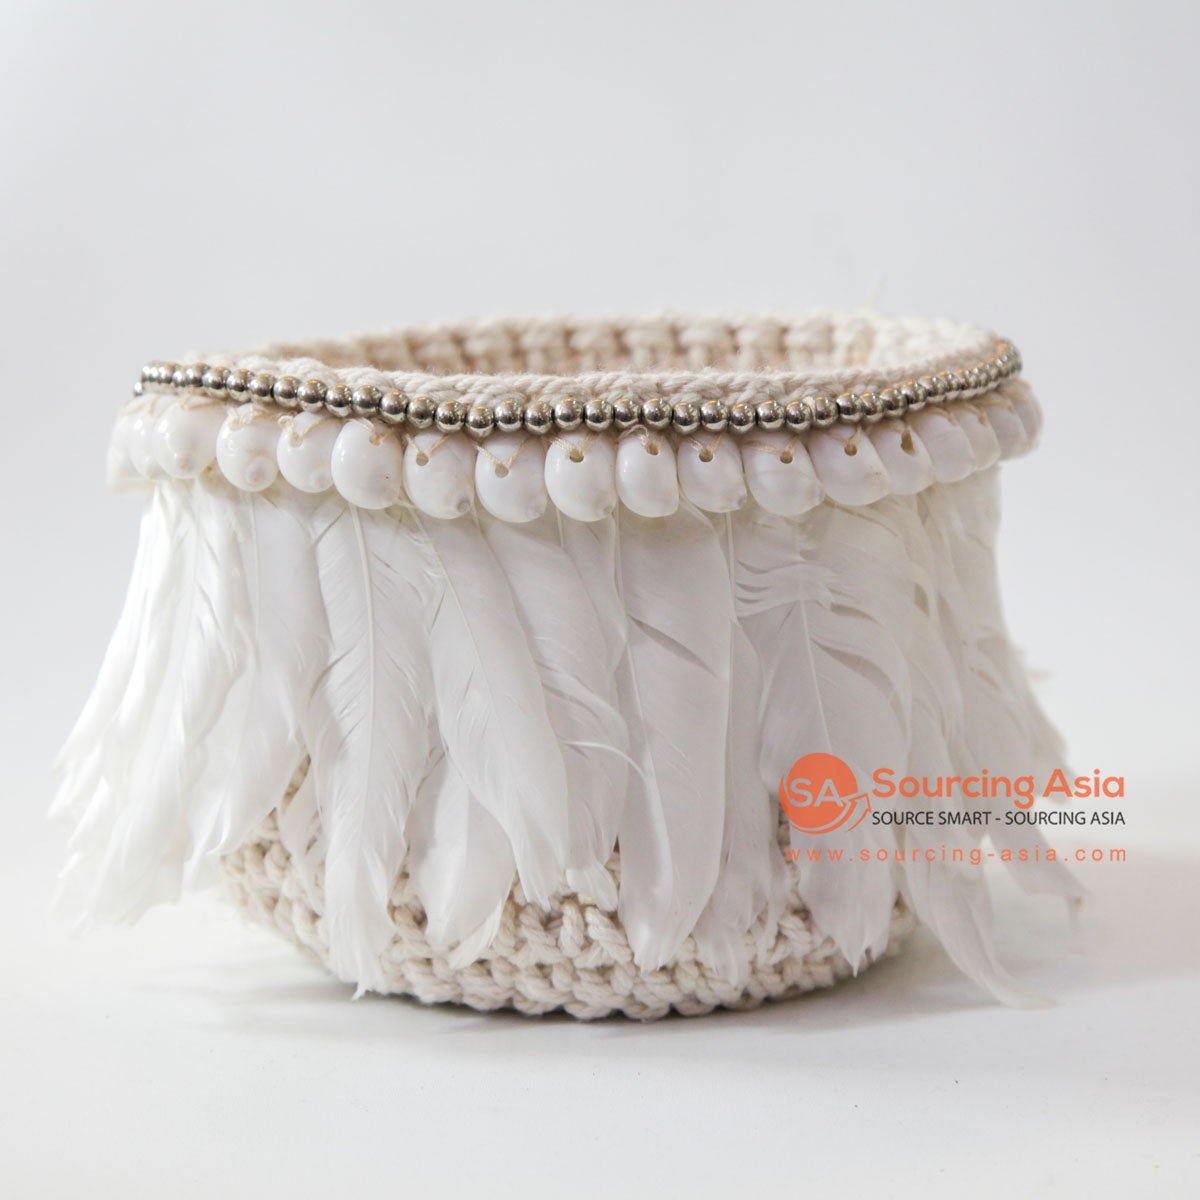 DHL125 CREAM MACRAME, WHITE FEATHERS, AND SHELL SMALL BASKET